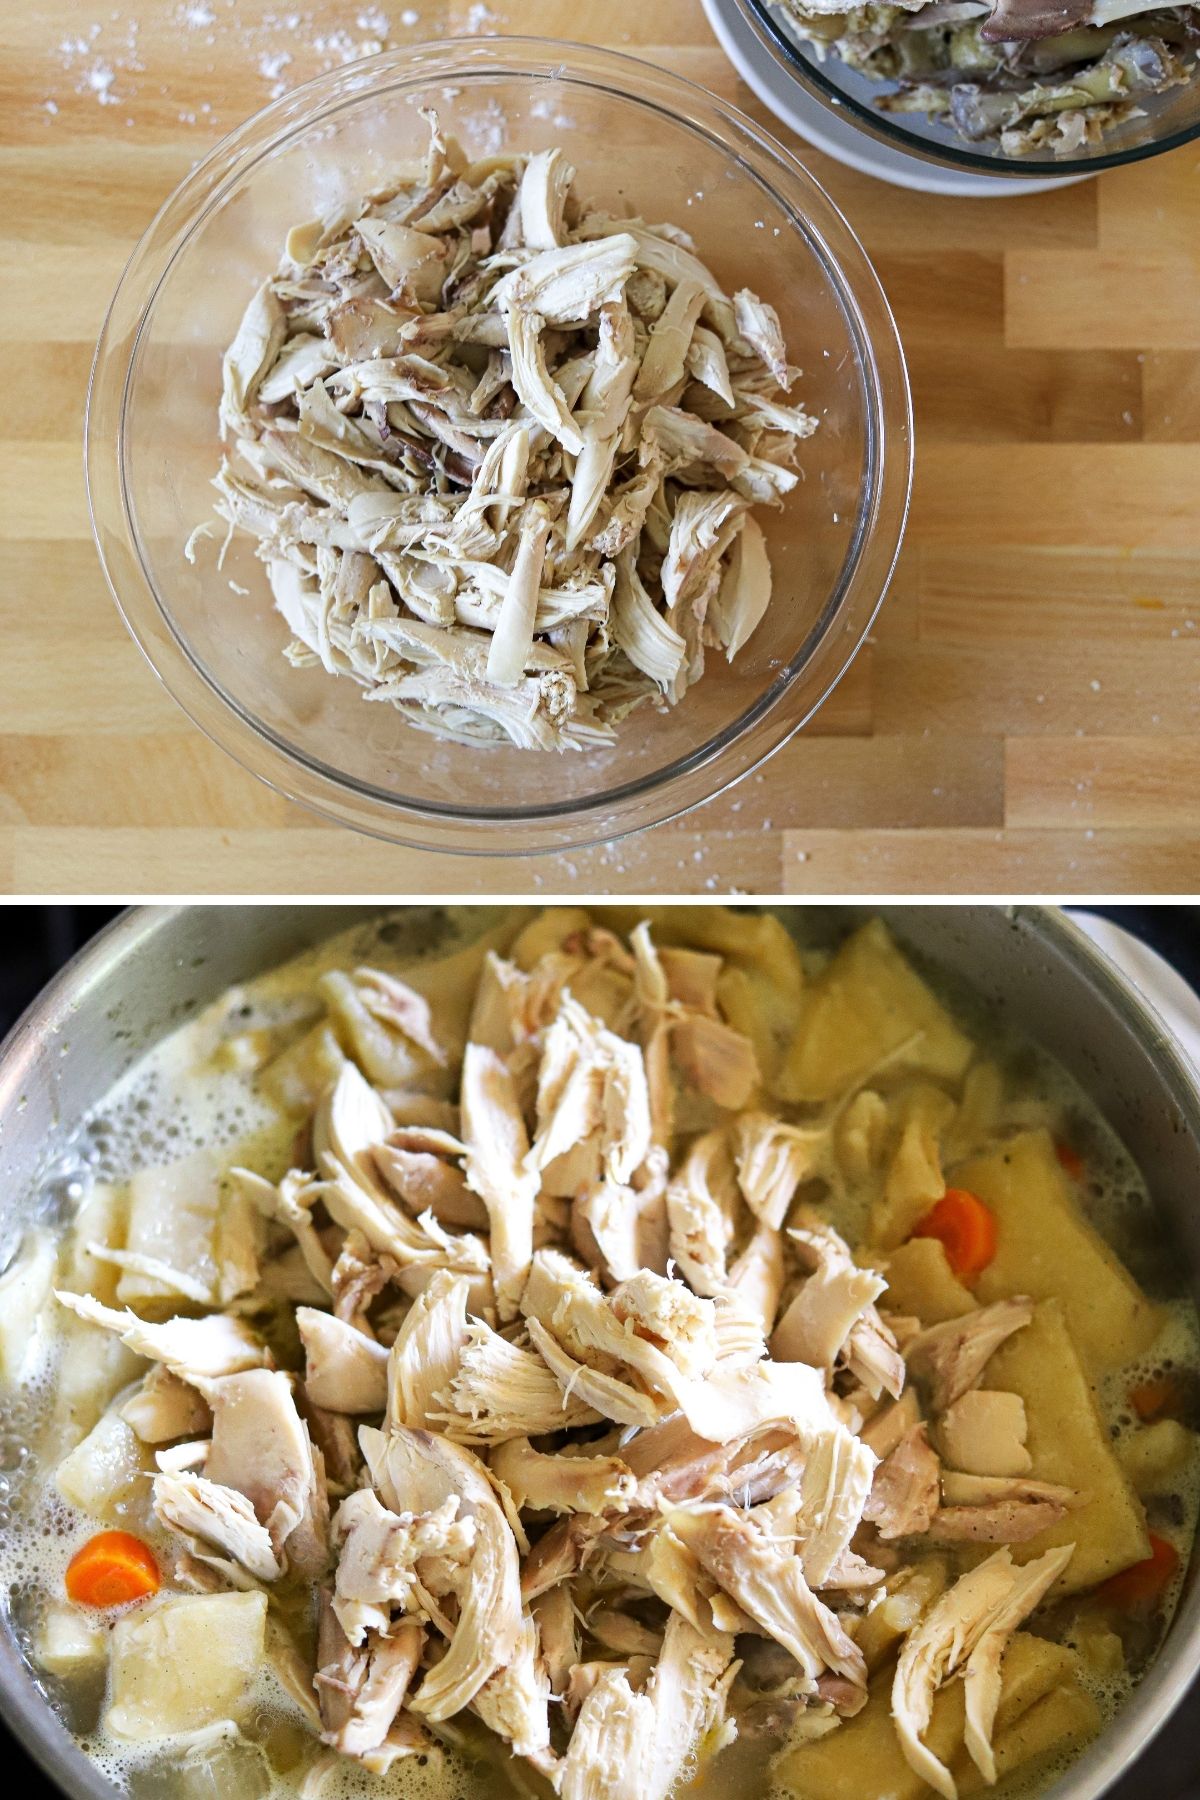 a two image collage showing cooked chicken after being removed from the bone, and then added to a pot of cooked dumplings.